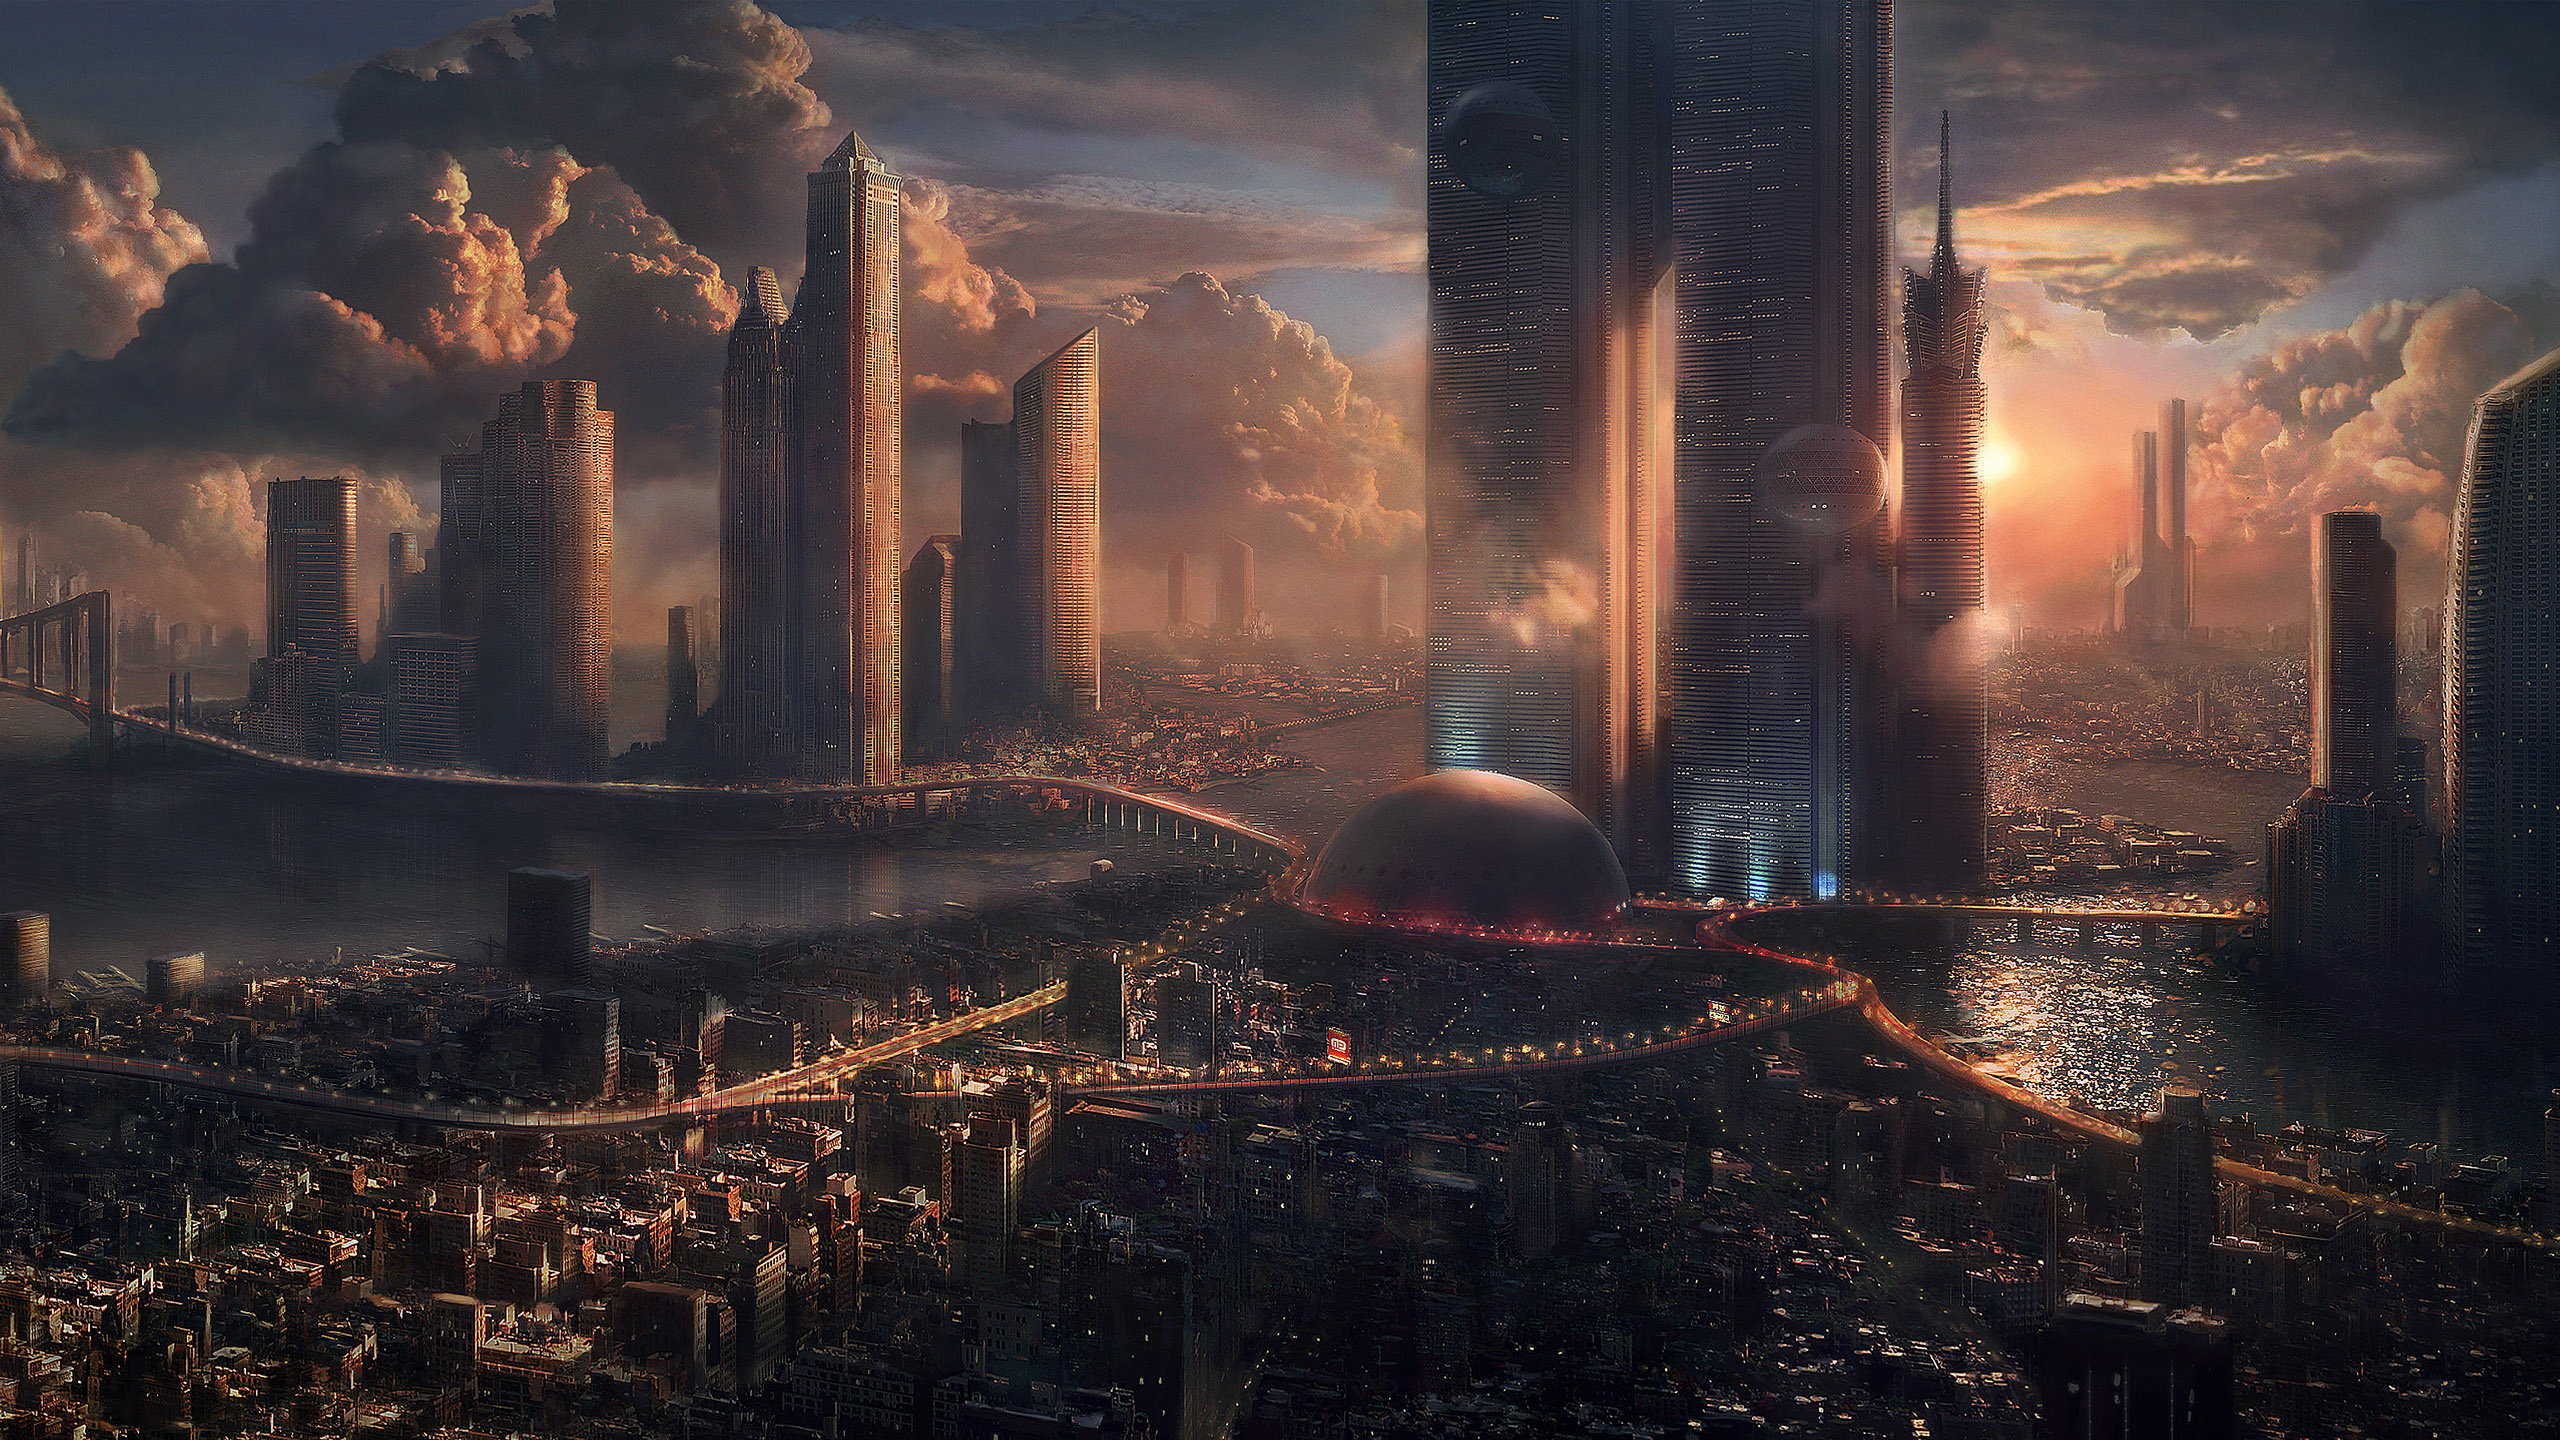 Futuristic city wallpapers 2560x1440 backgrounds